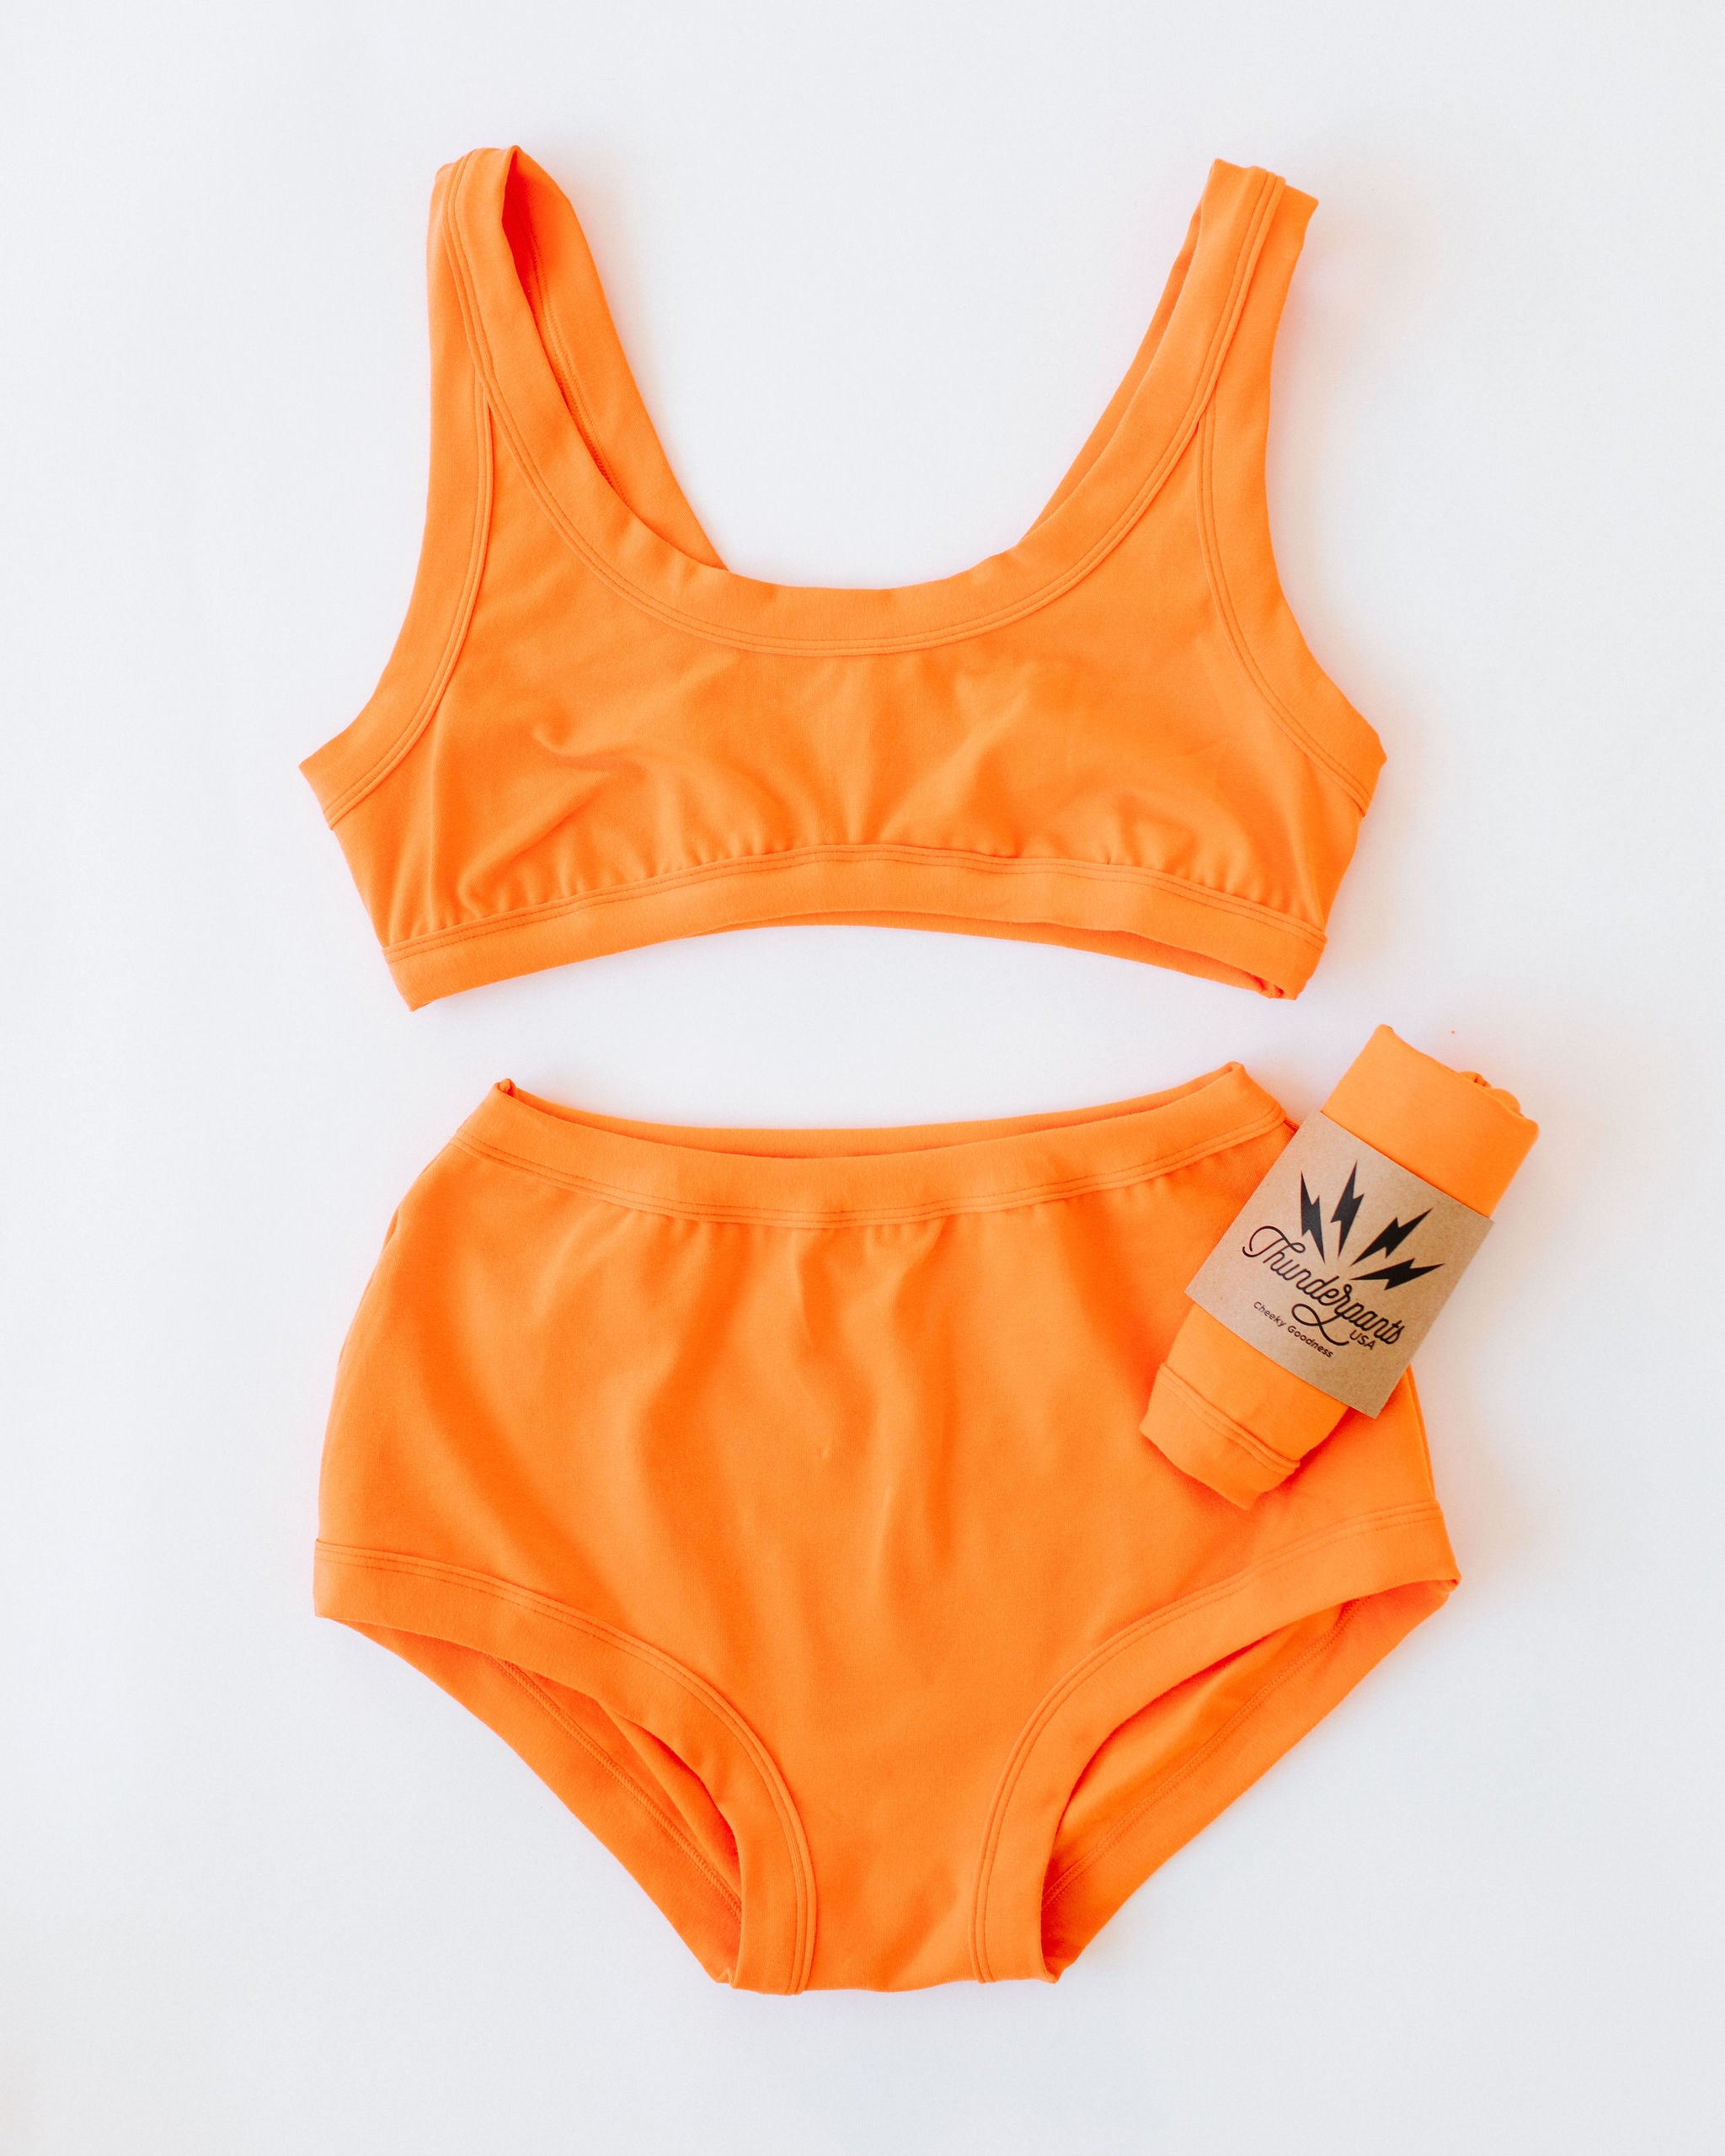 Flat lay of Thunderpants Bralette and Original style underwear in Oregon Sunstone orange color.